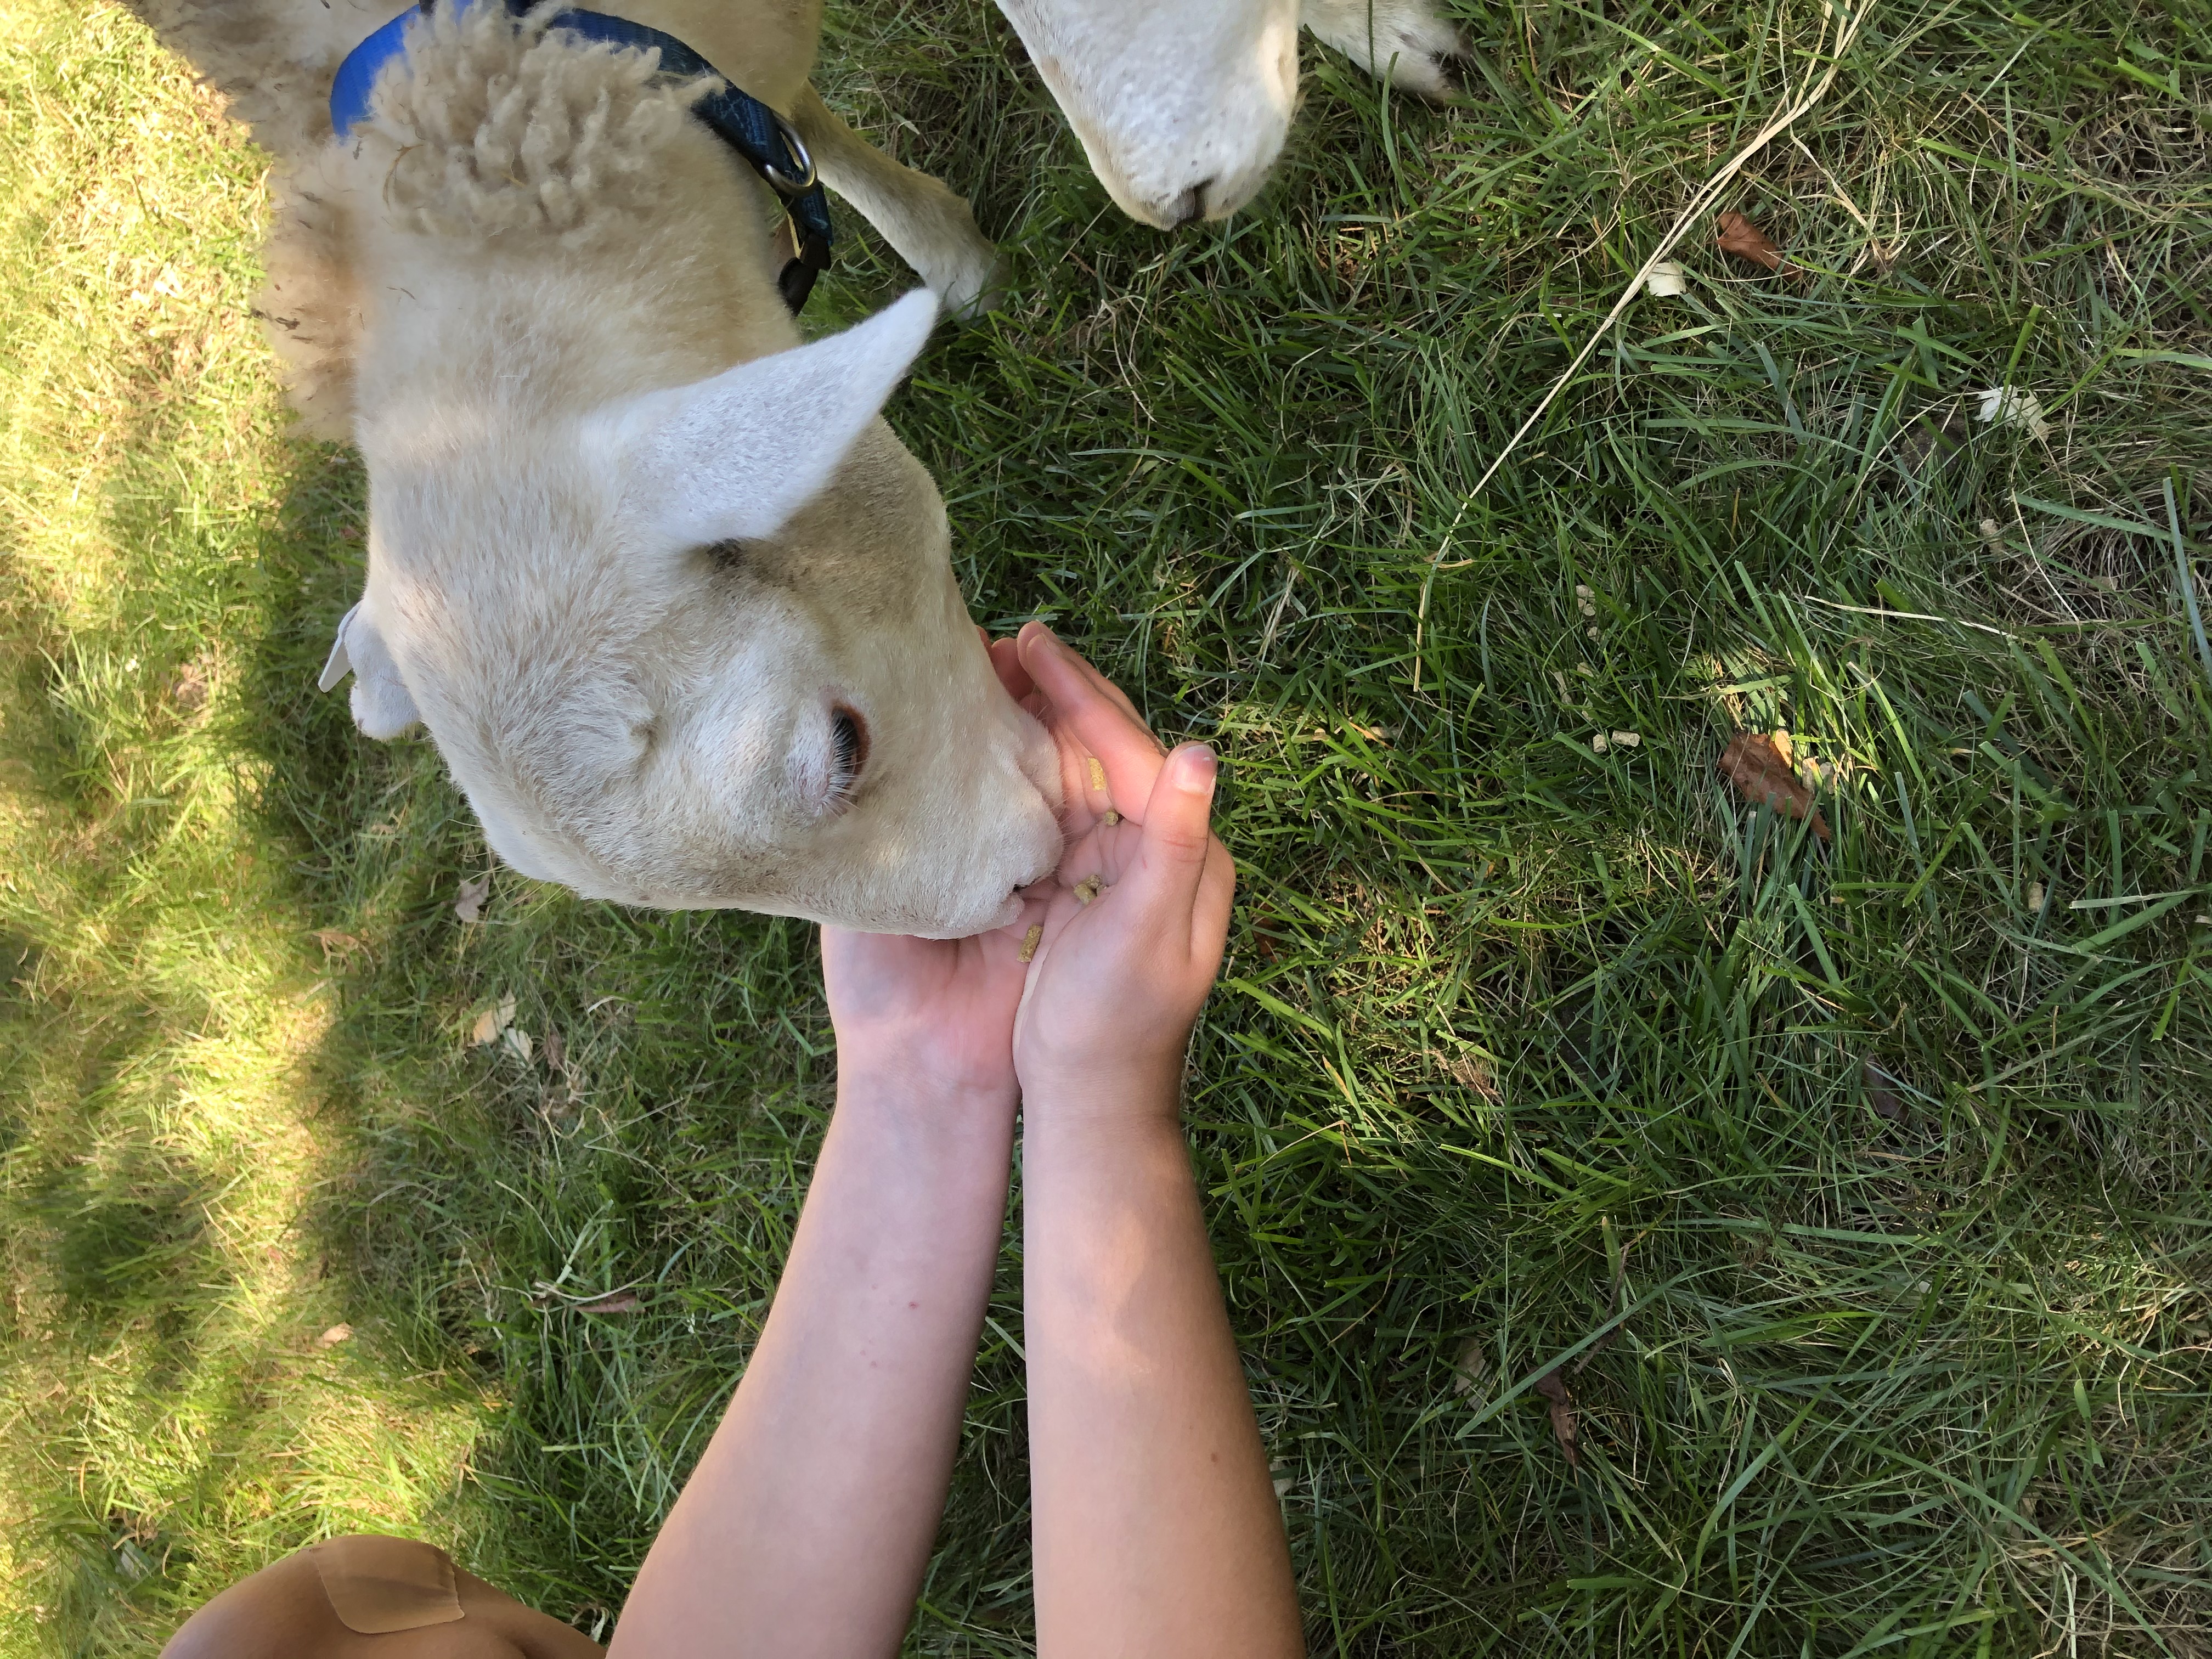 Baby lamb eating from child's hands